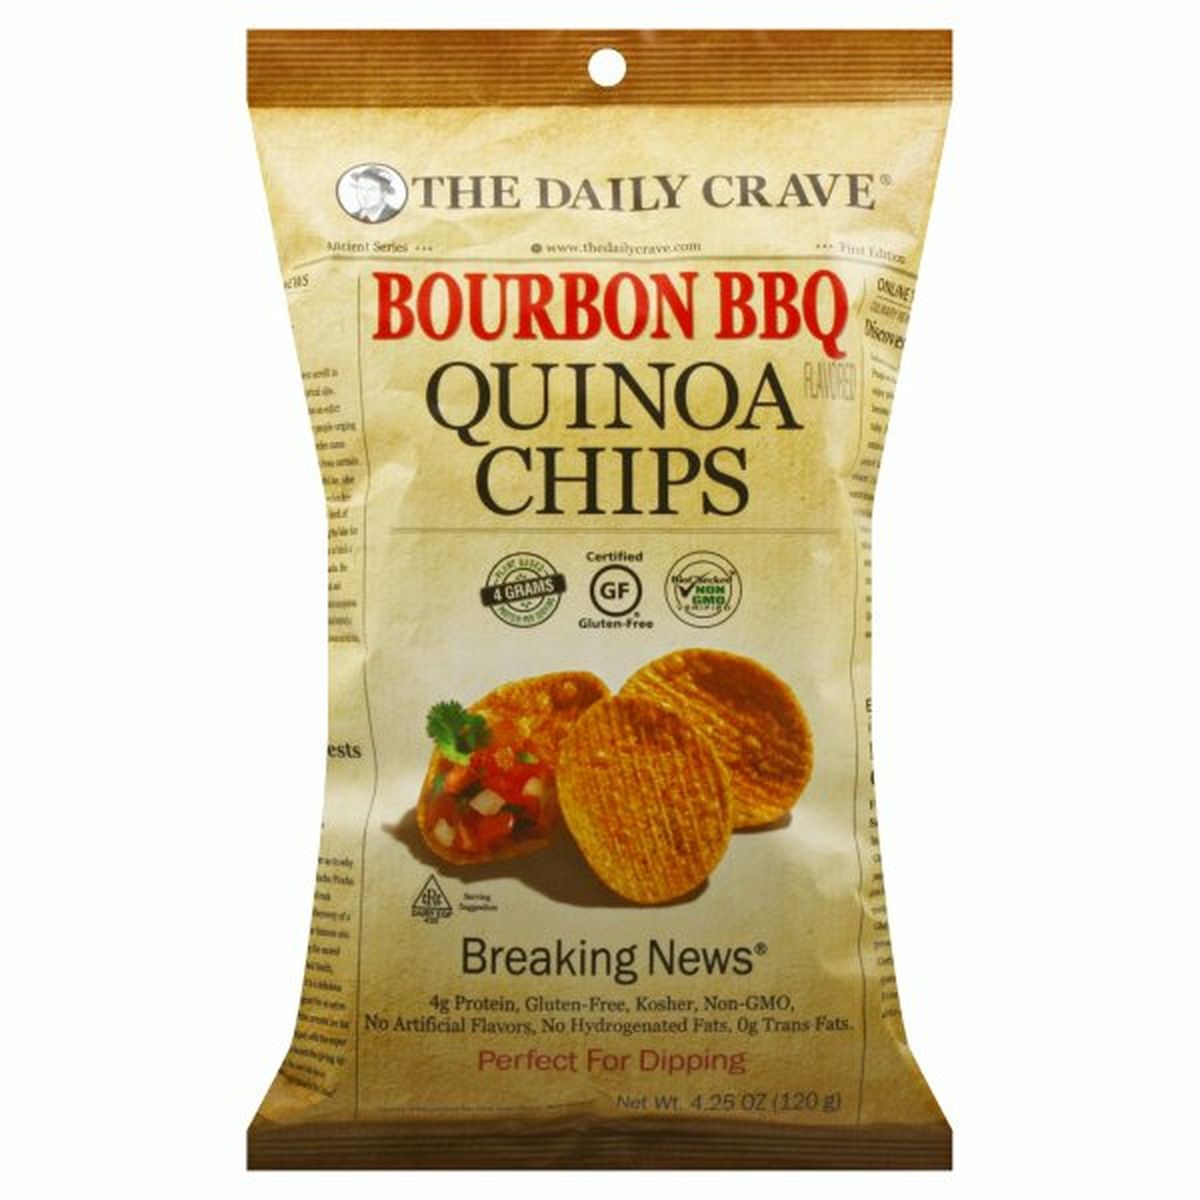 Calories in The Daily Crave Breaking News Quinoa Chips, Bourbon BBQ Flavored